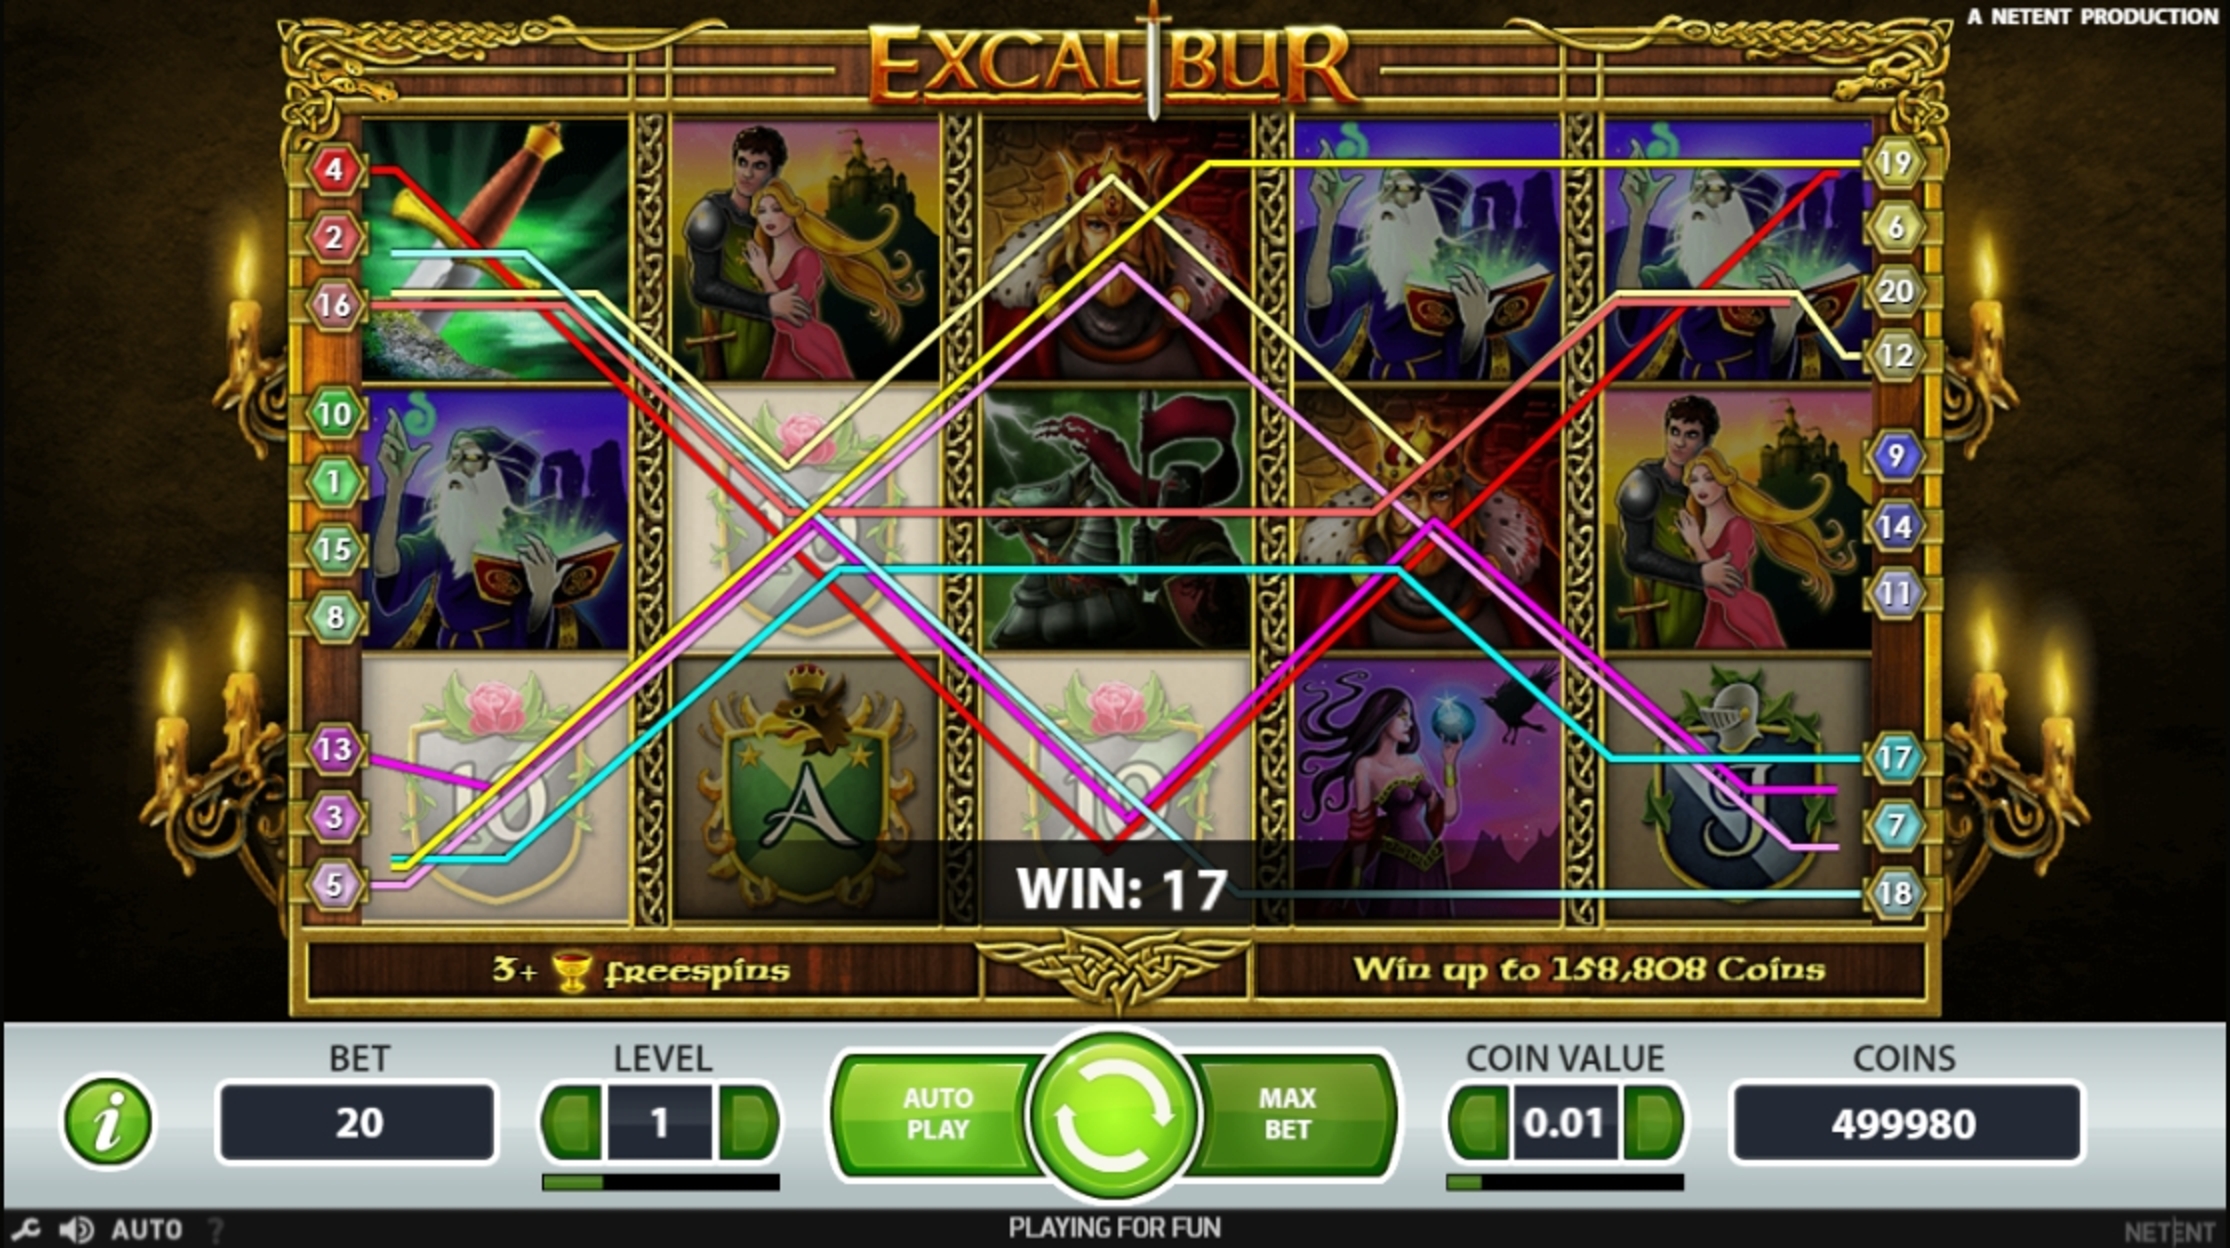 Win Money in Excalibur Free Slot Game by NetEnt